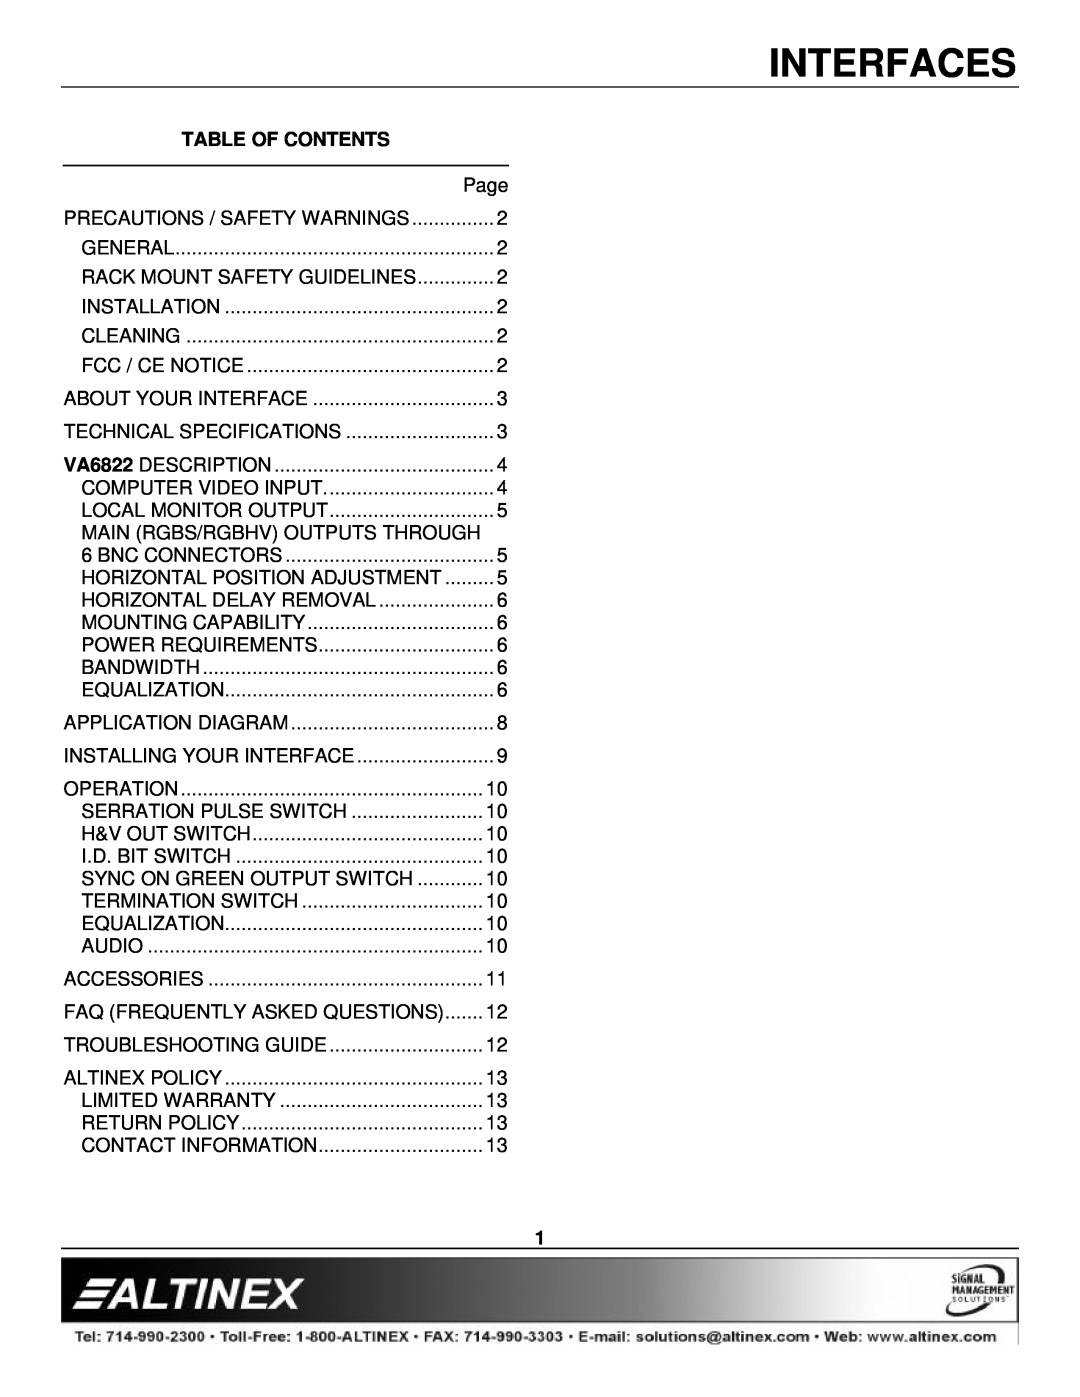 Altinex VA6822 manual Interfaces, Table Of Contents 